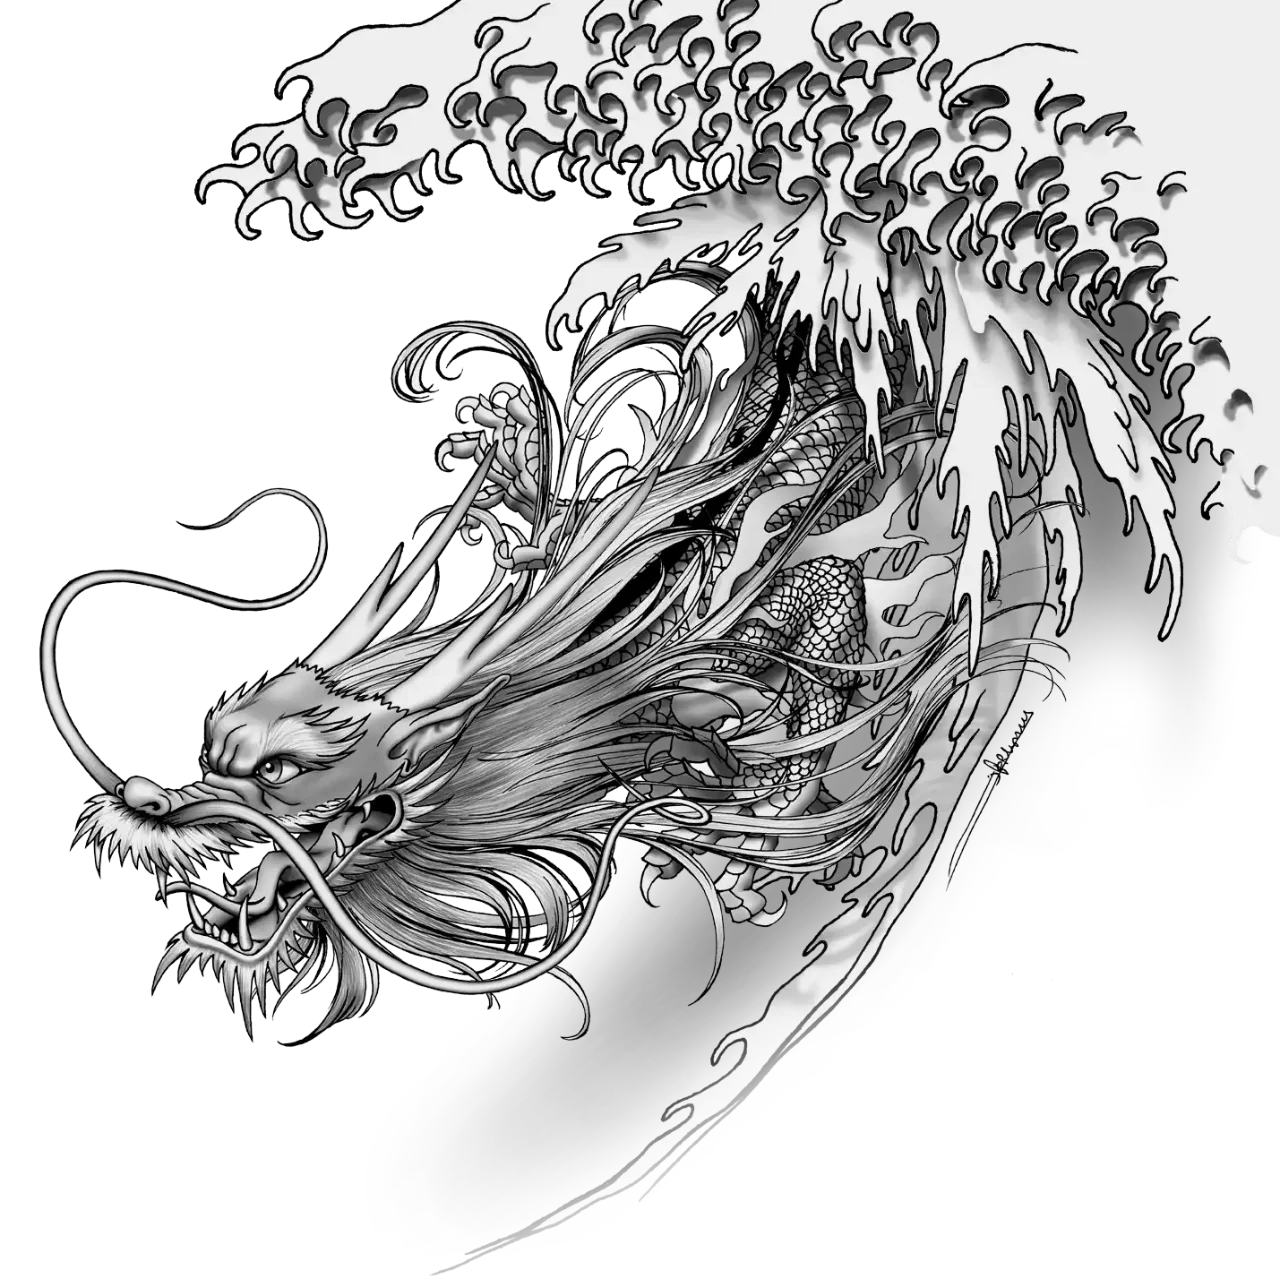 Illustration of the front end of a dragon.